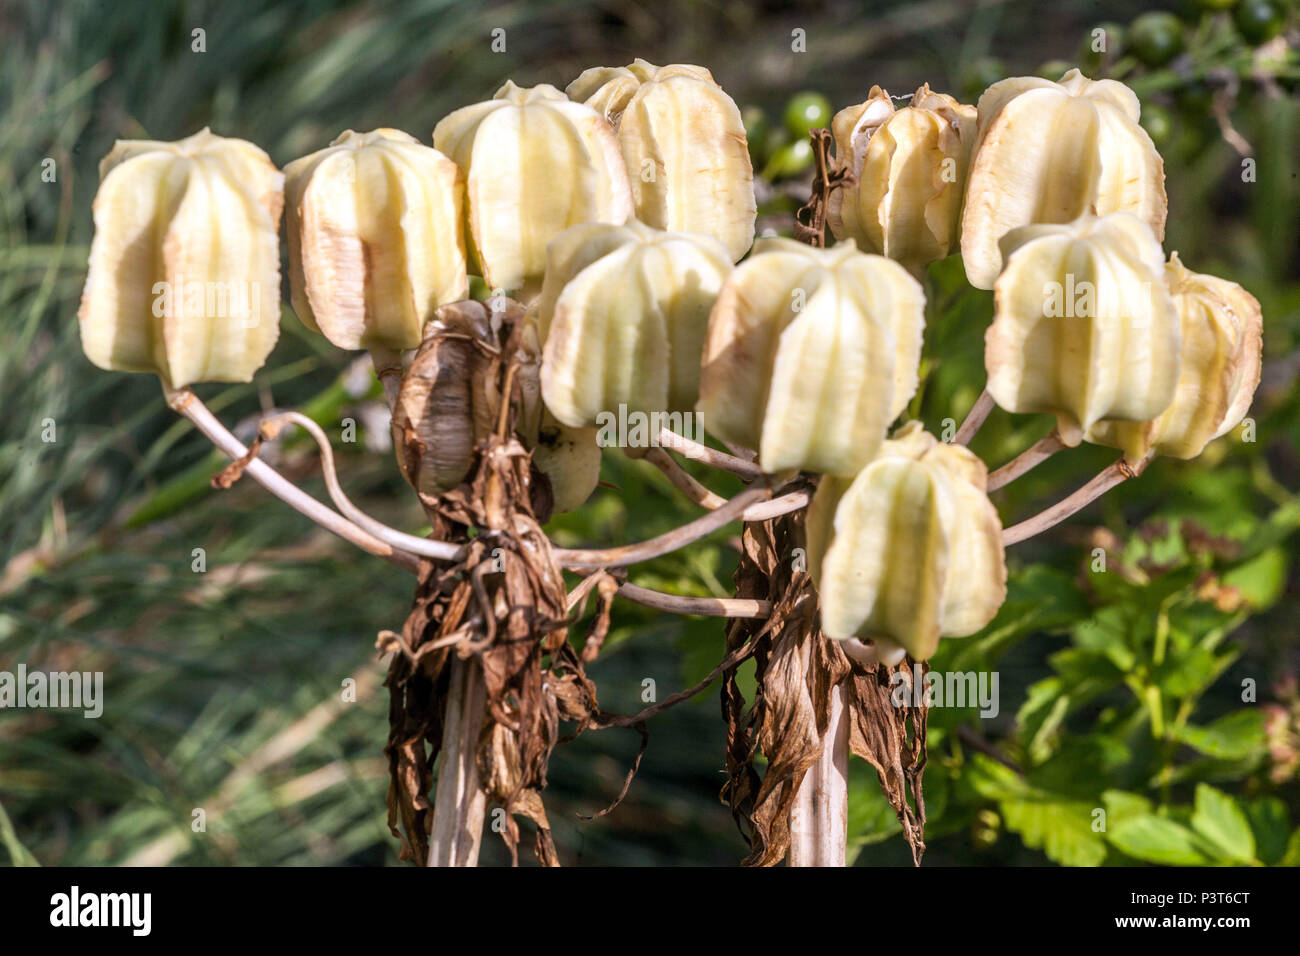 Fritillaria lutea Seedheads Gone to seed Fritillaria June Plant Pods Crown Imperial Fritillary Fritillaria imperialis Ripe Seeds of plants In Pods Stock Photo